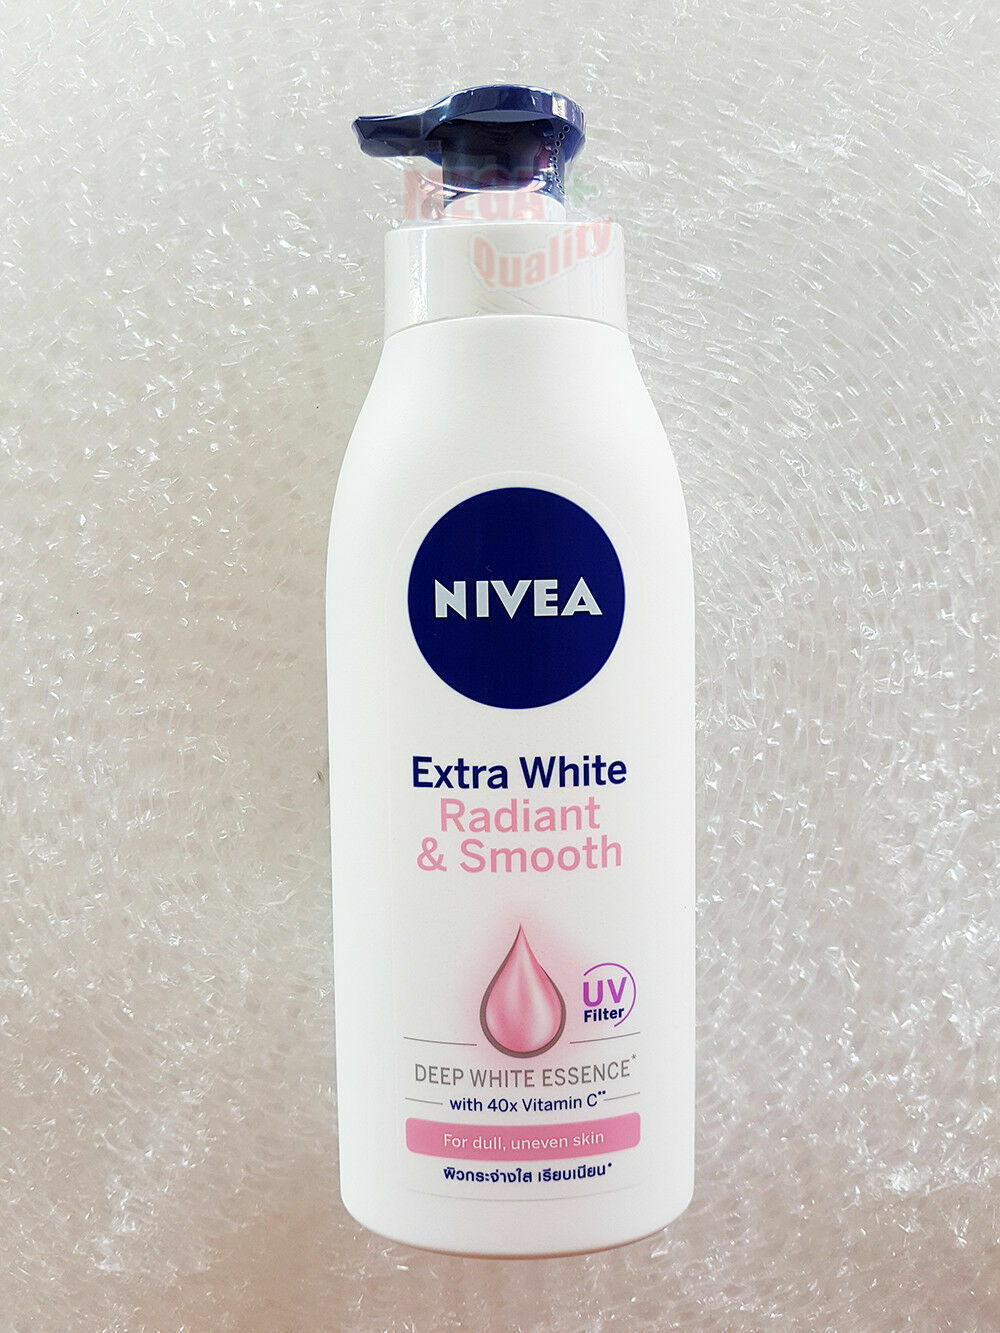 NIVEA Extra White Radiant & Smooth Body Lotion - 400ml, Lot of 2 Bottles  for sale online